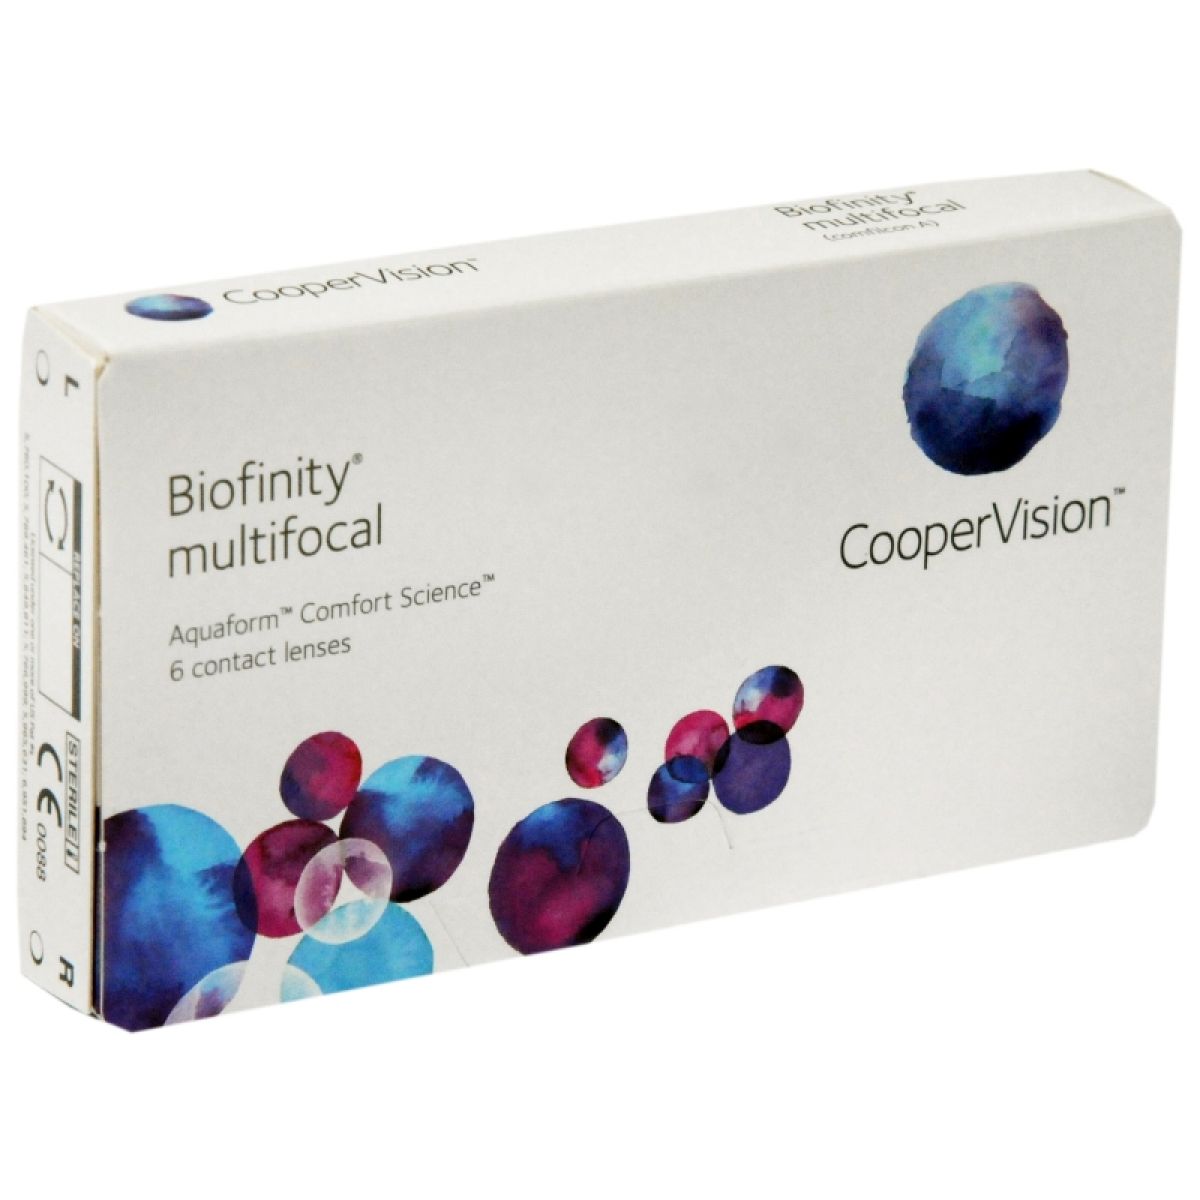 BIOFINITY MULTIFOCAL MONTHLY DISPOSABLE SILICON HYDROGEL MULTIFOCAL CONTACT LENSES (6 LENSES)